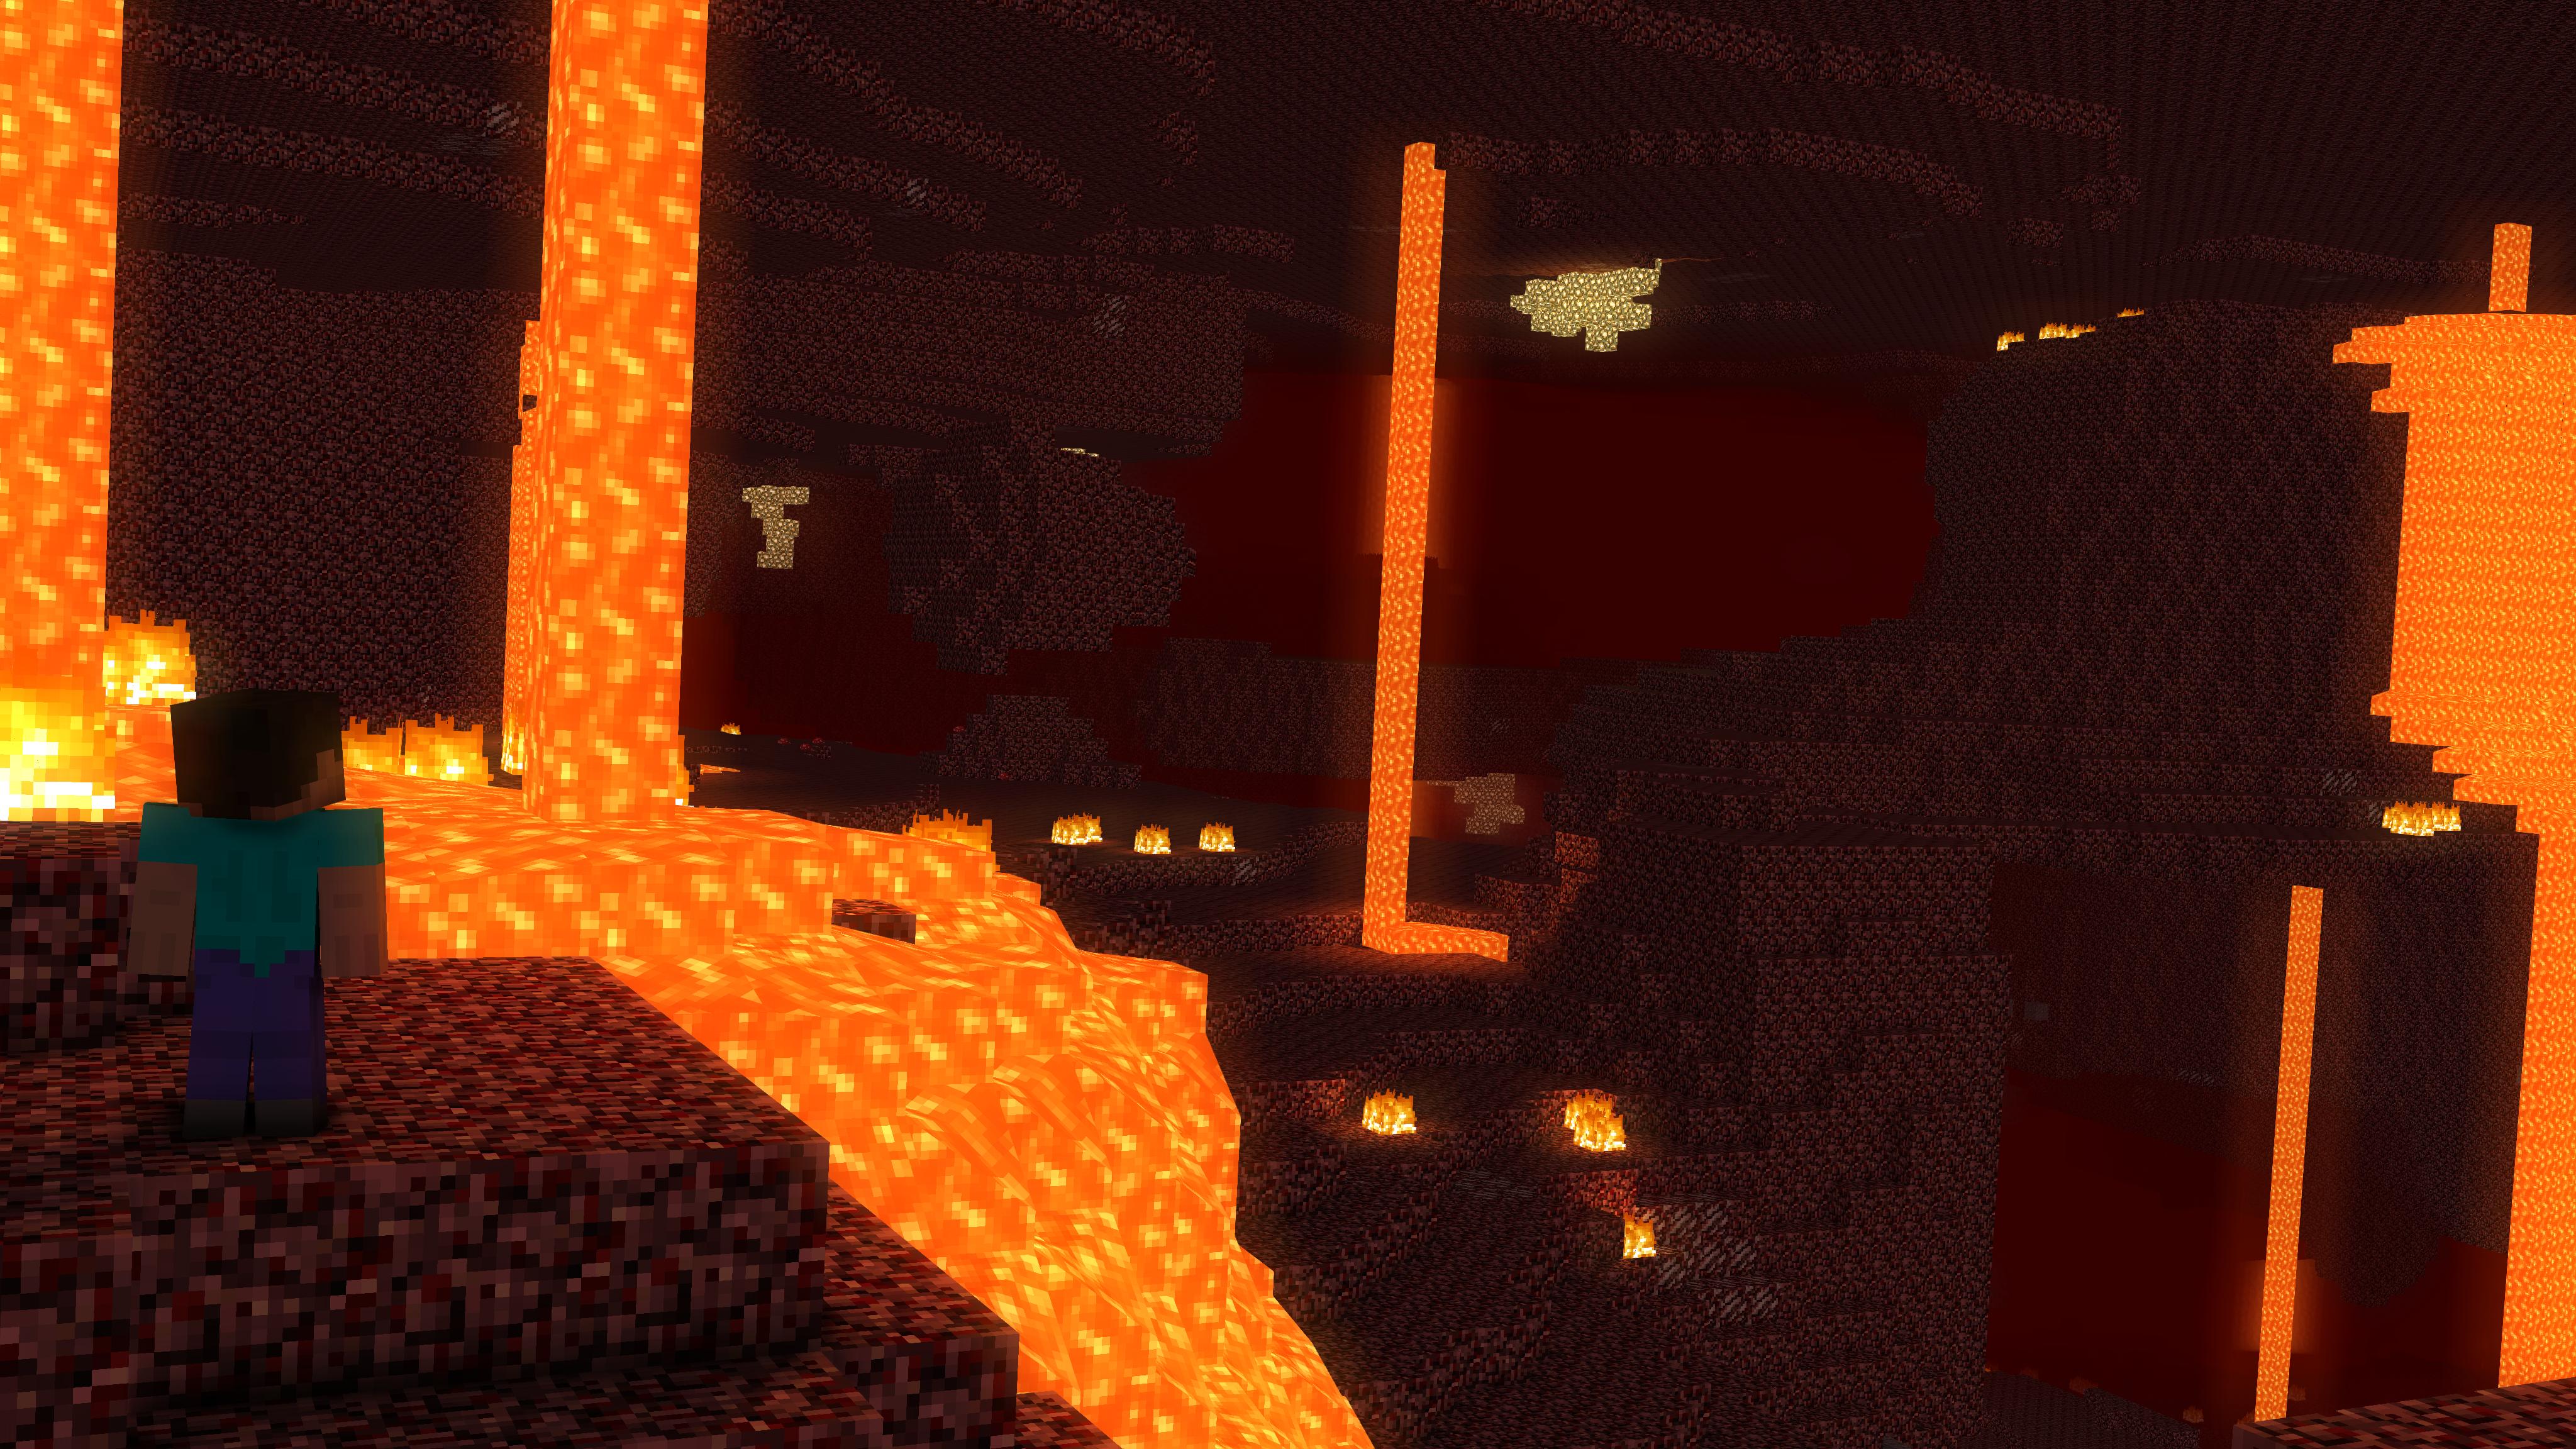 4k The Nether And Art Imator Forums